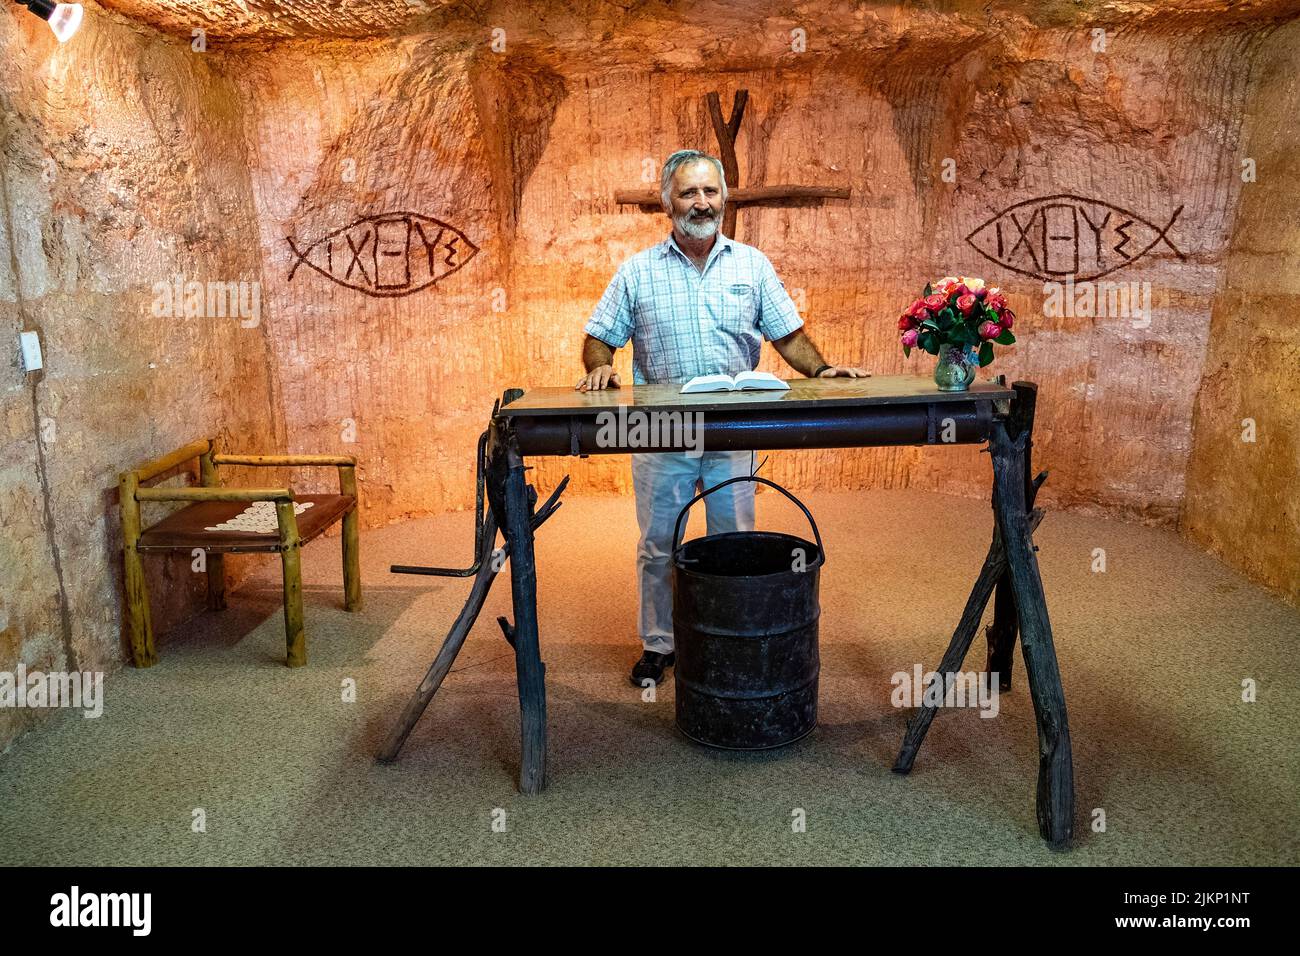 An Anglican priest in the underground Catacomb Church in the opal mining town of Coober Pedy, South Australia Stock Photo